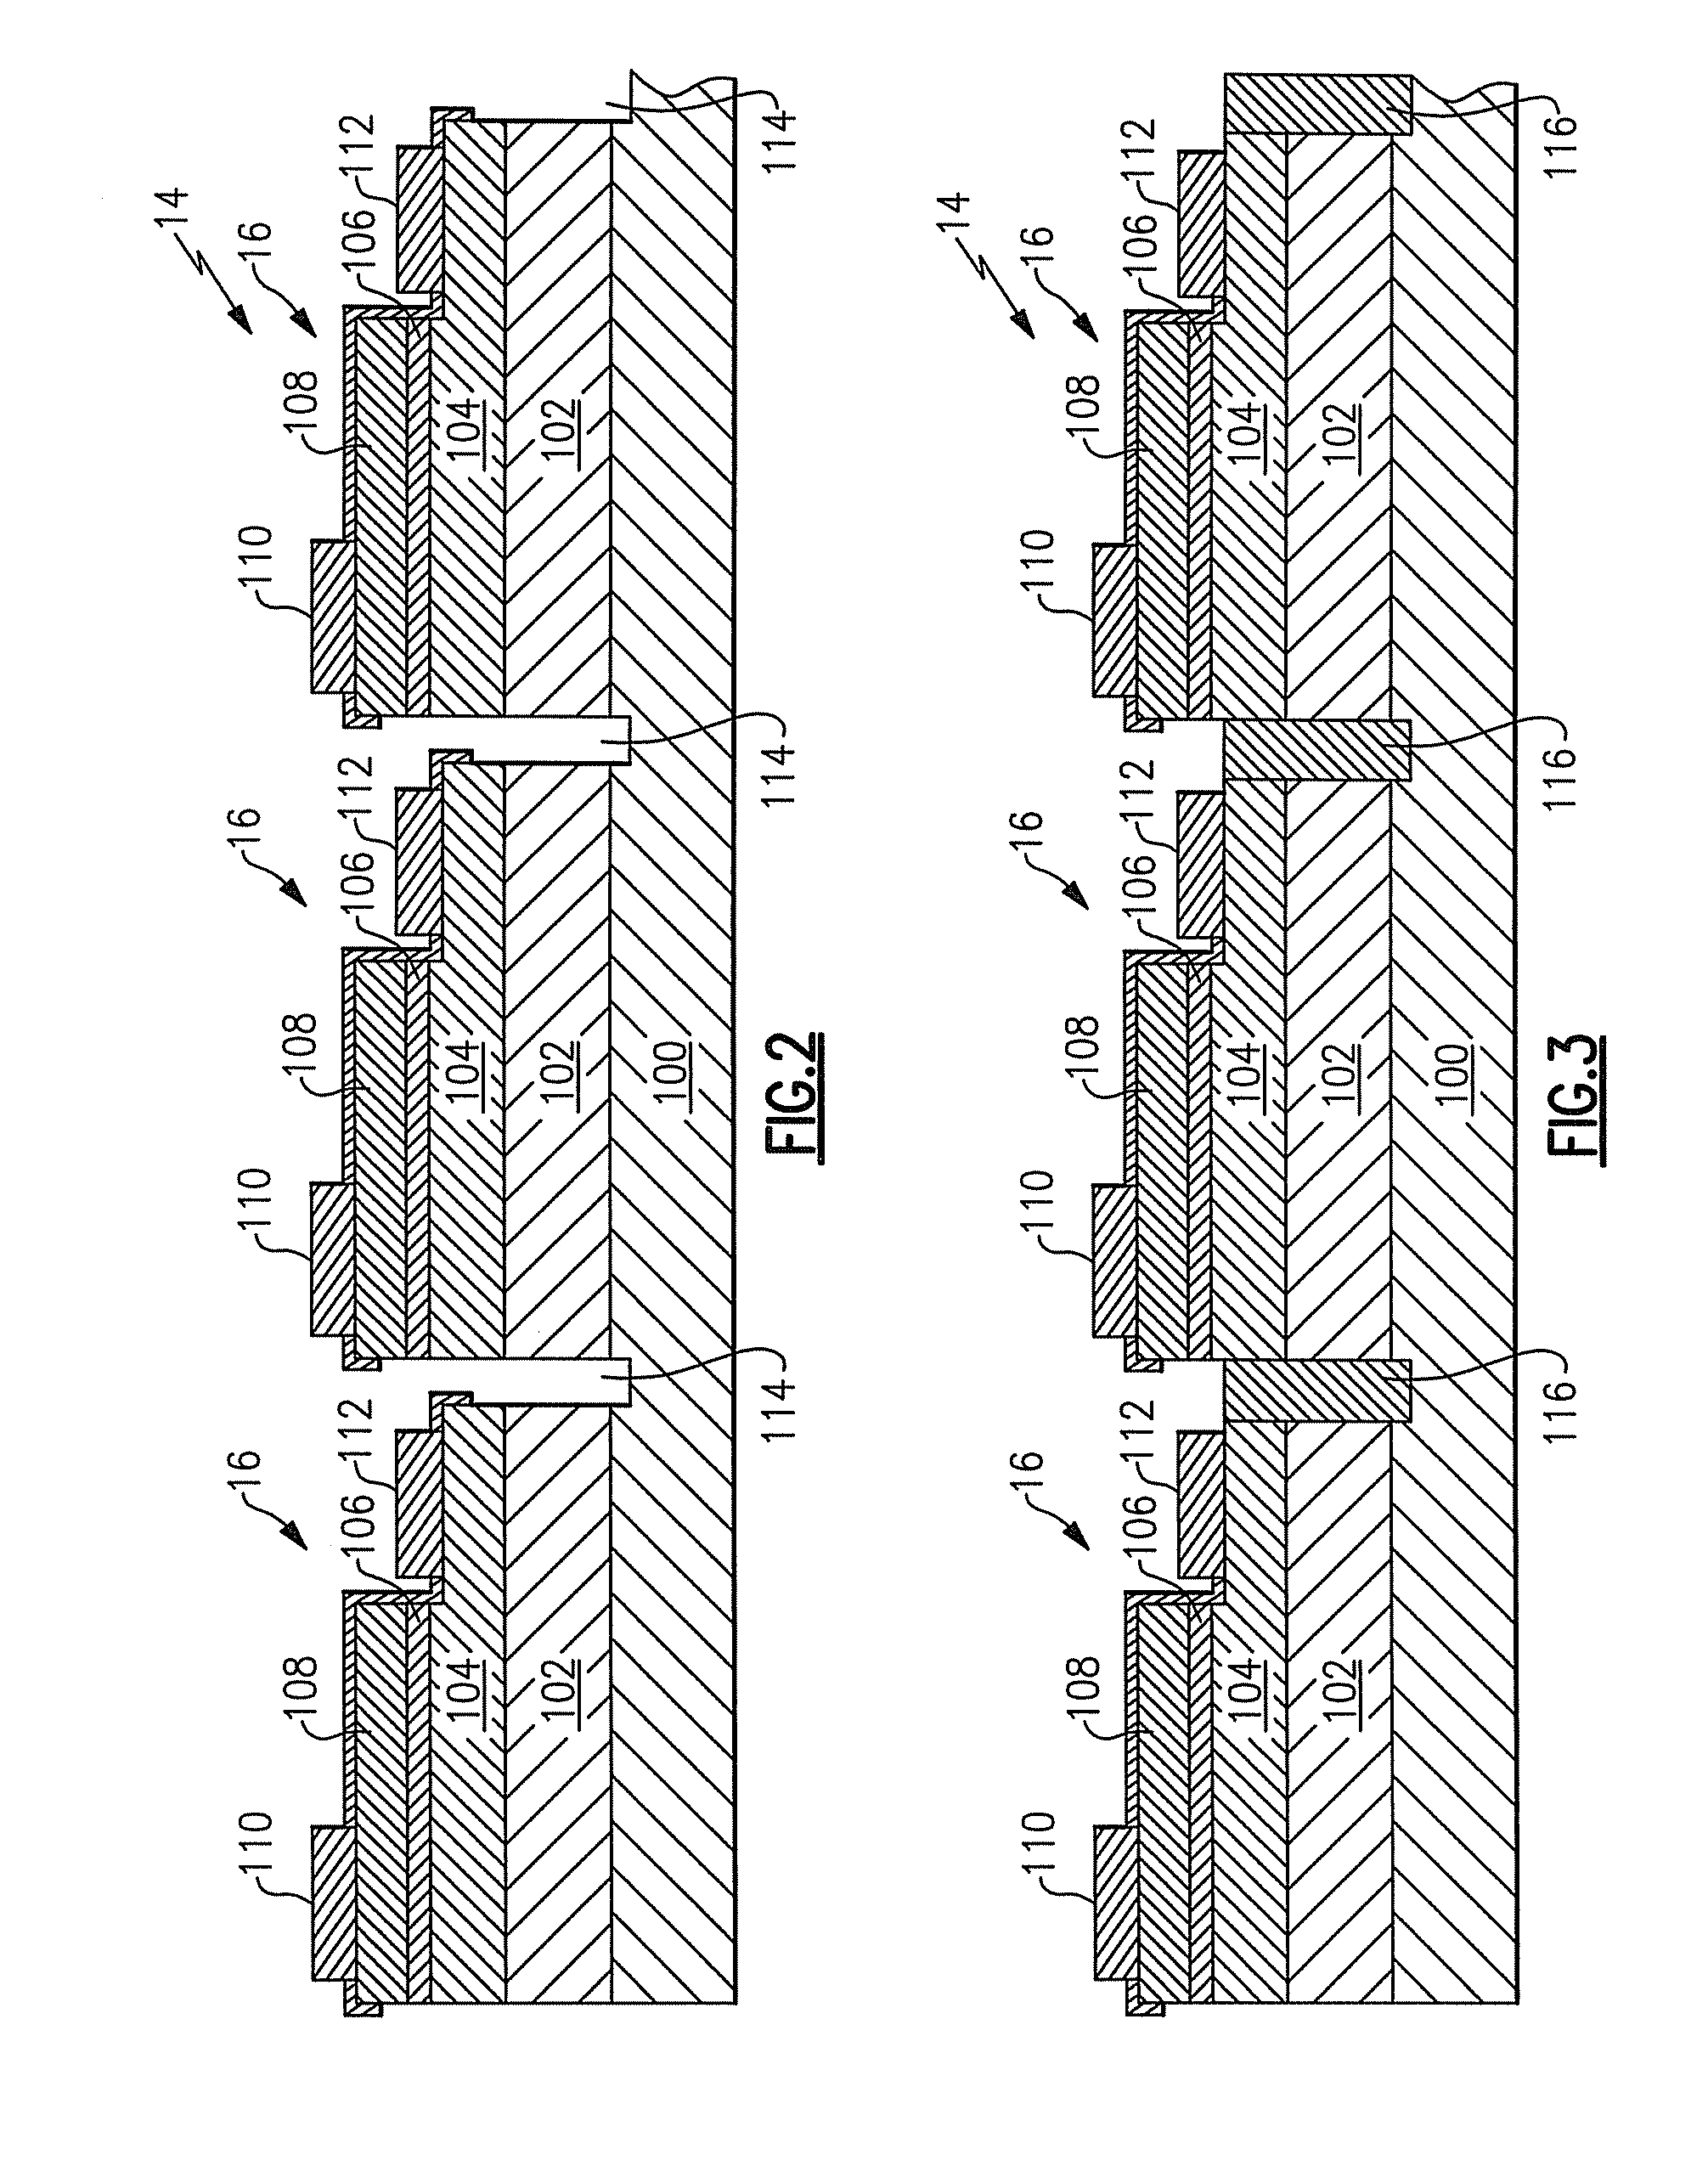 Illumination devices using externally interconnected arrays of light emitting devices, and methods of fabricating same